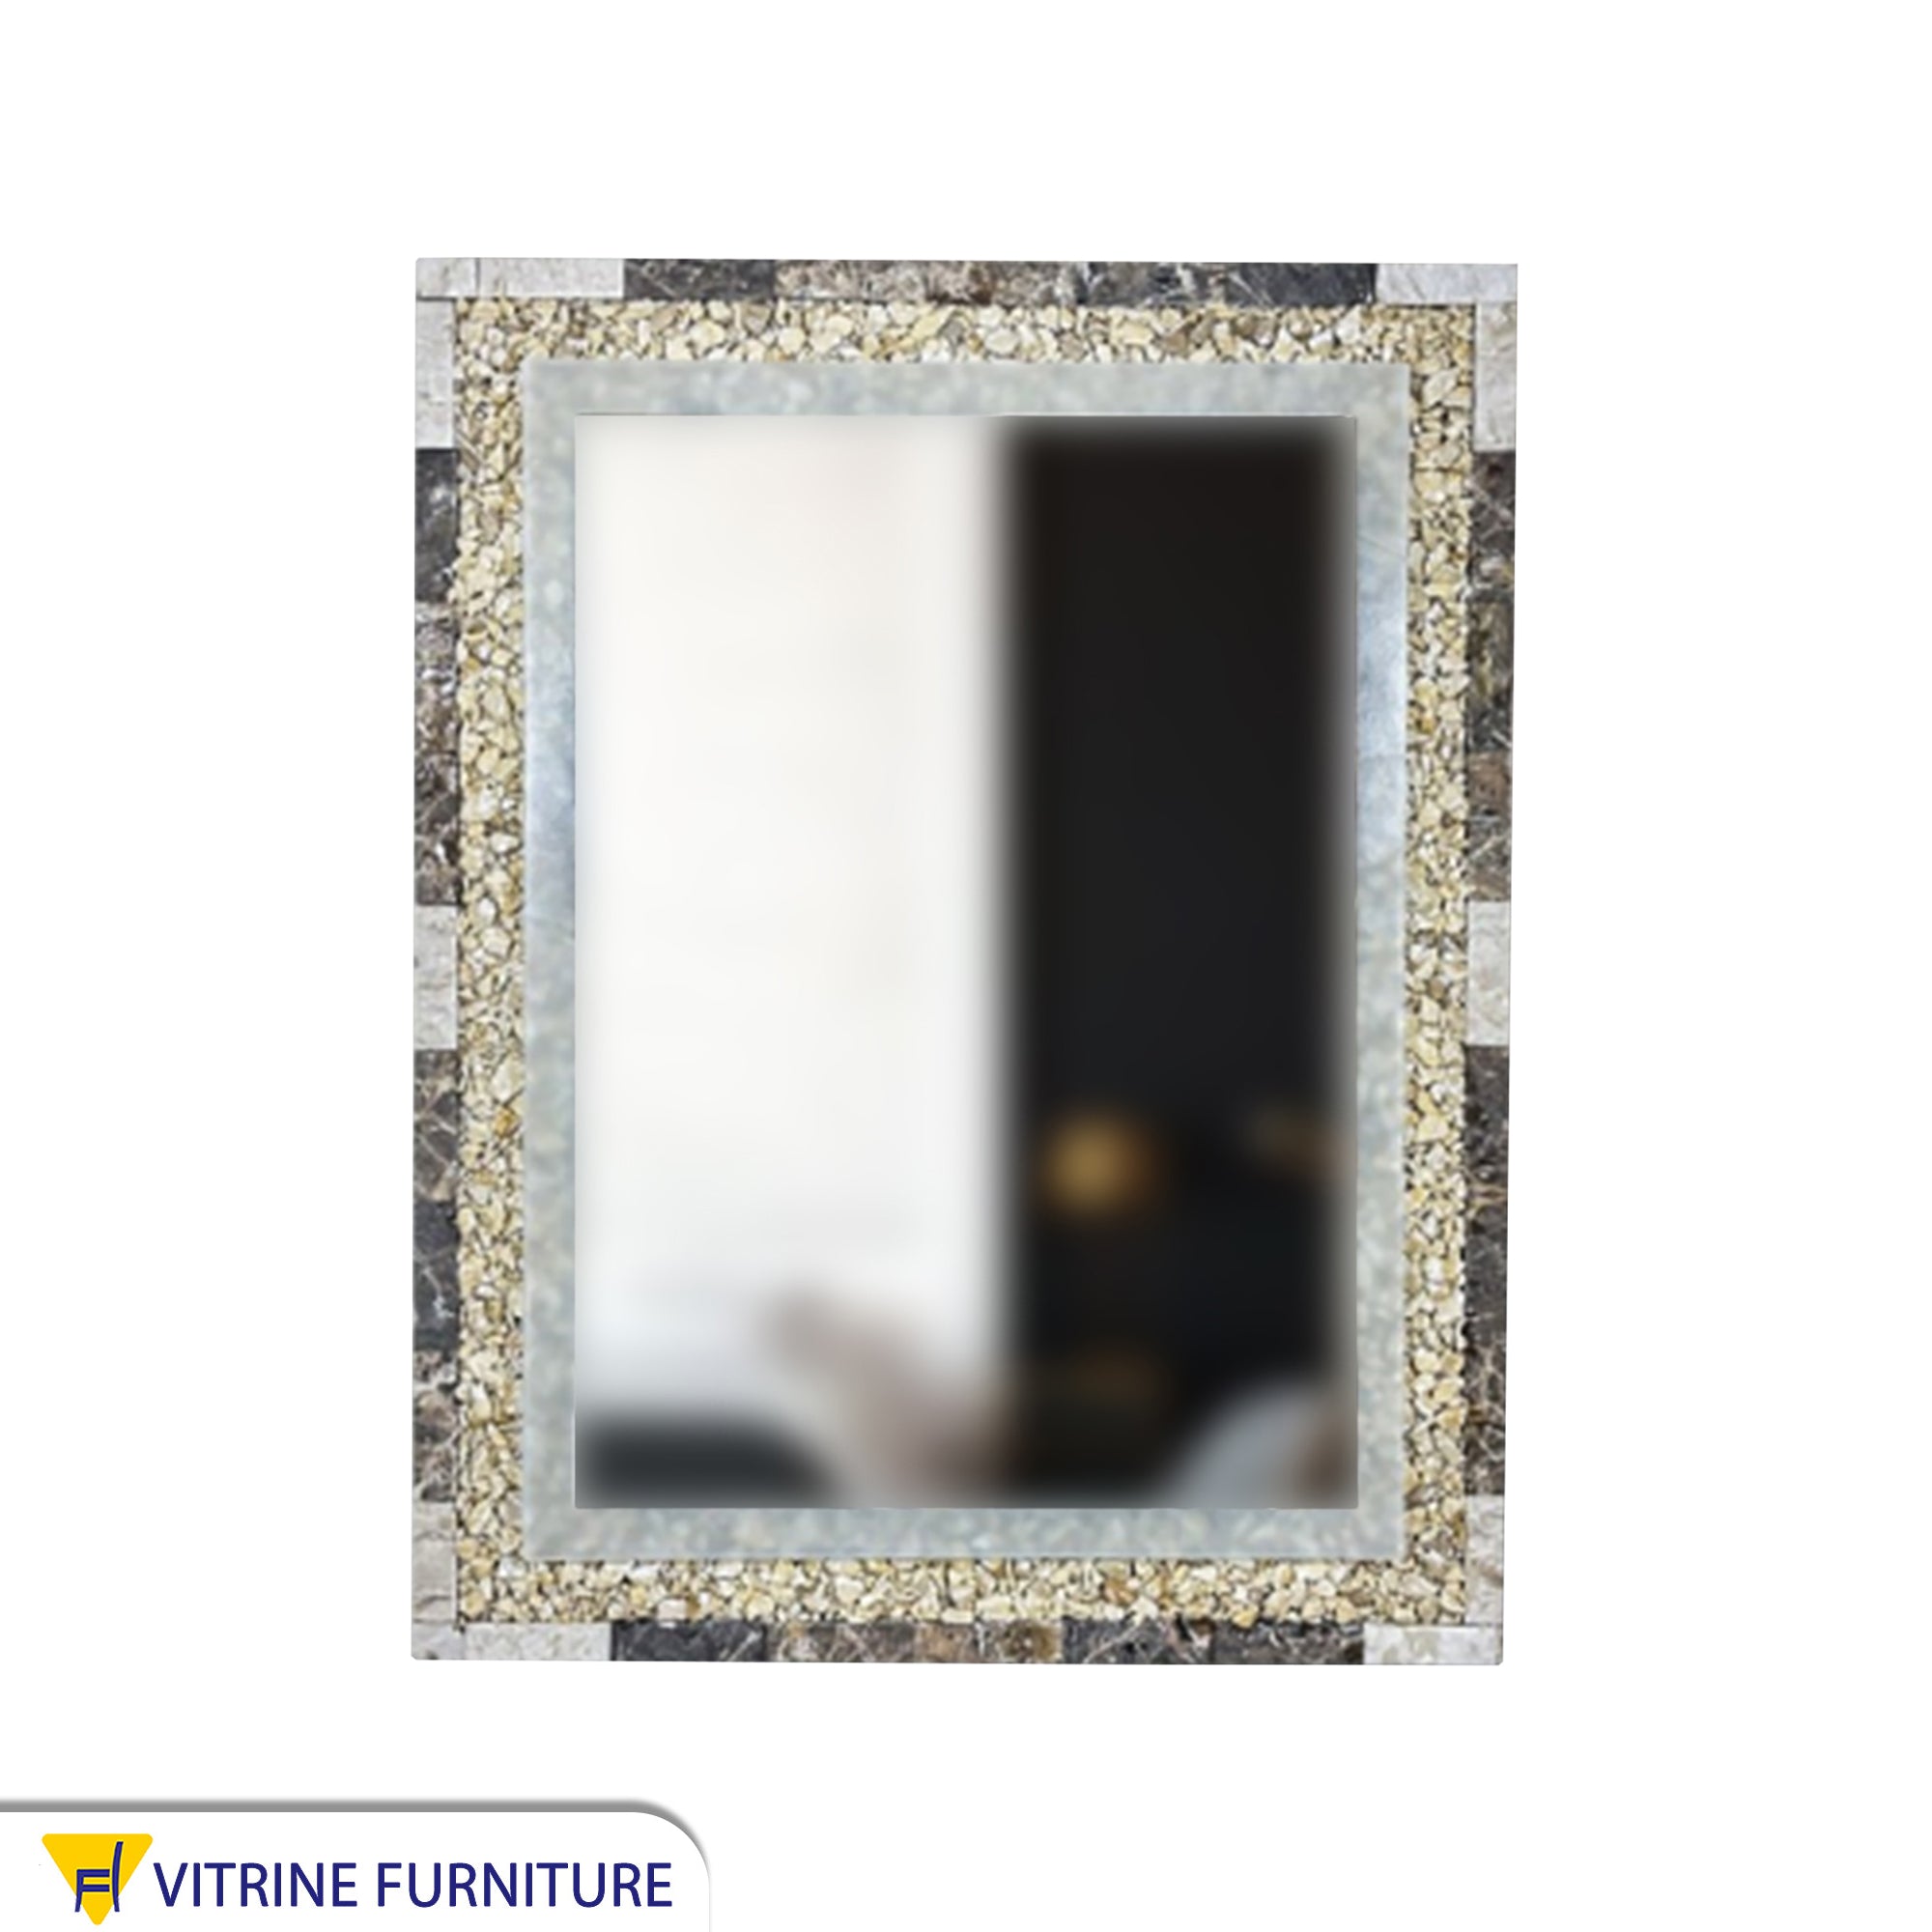 Rectangular mirror with a marble and stone frame